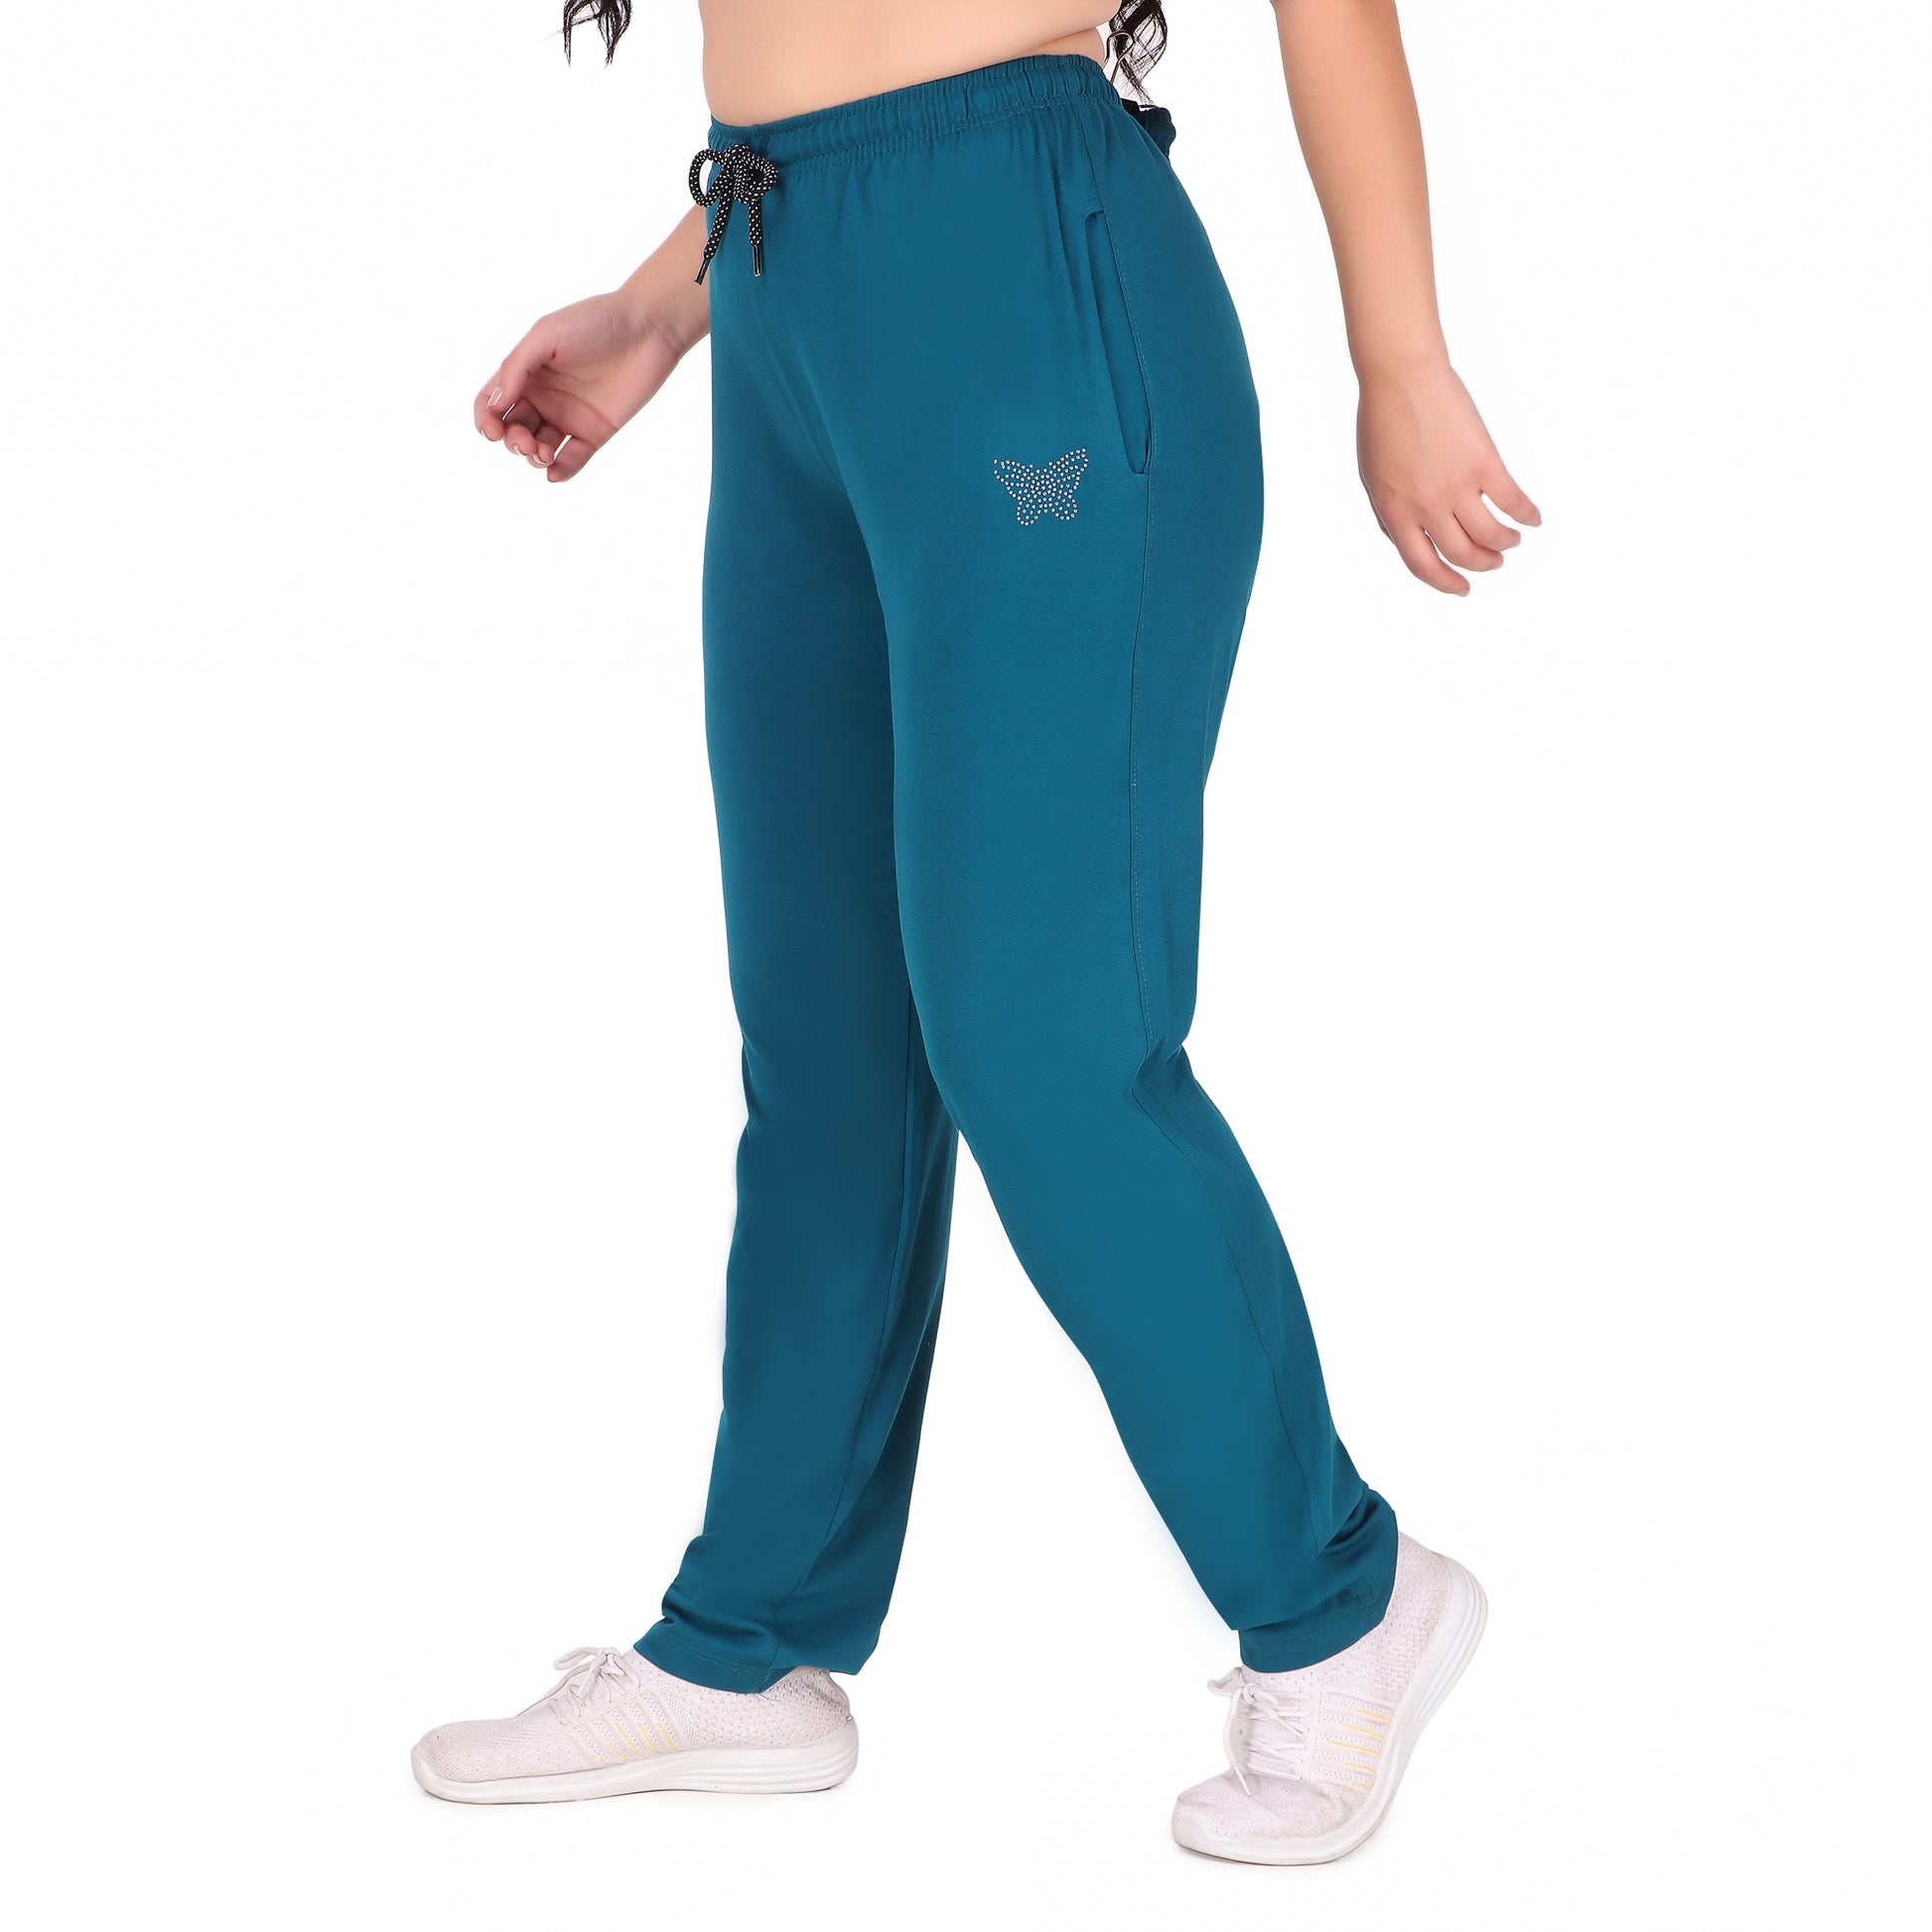 Cupid Cotton Track Pant for Women And Girls Combo Pack of 3 - Mauve/Teal/Navy freeshipping - Cupid Clothings